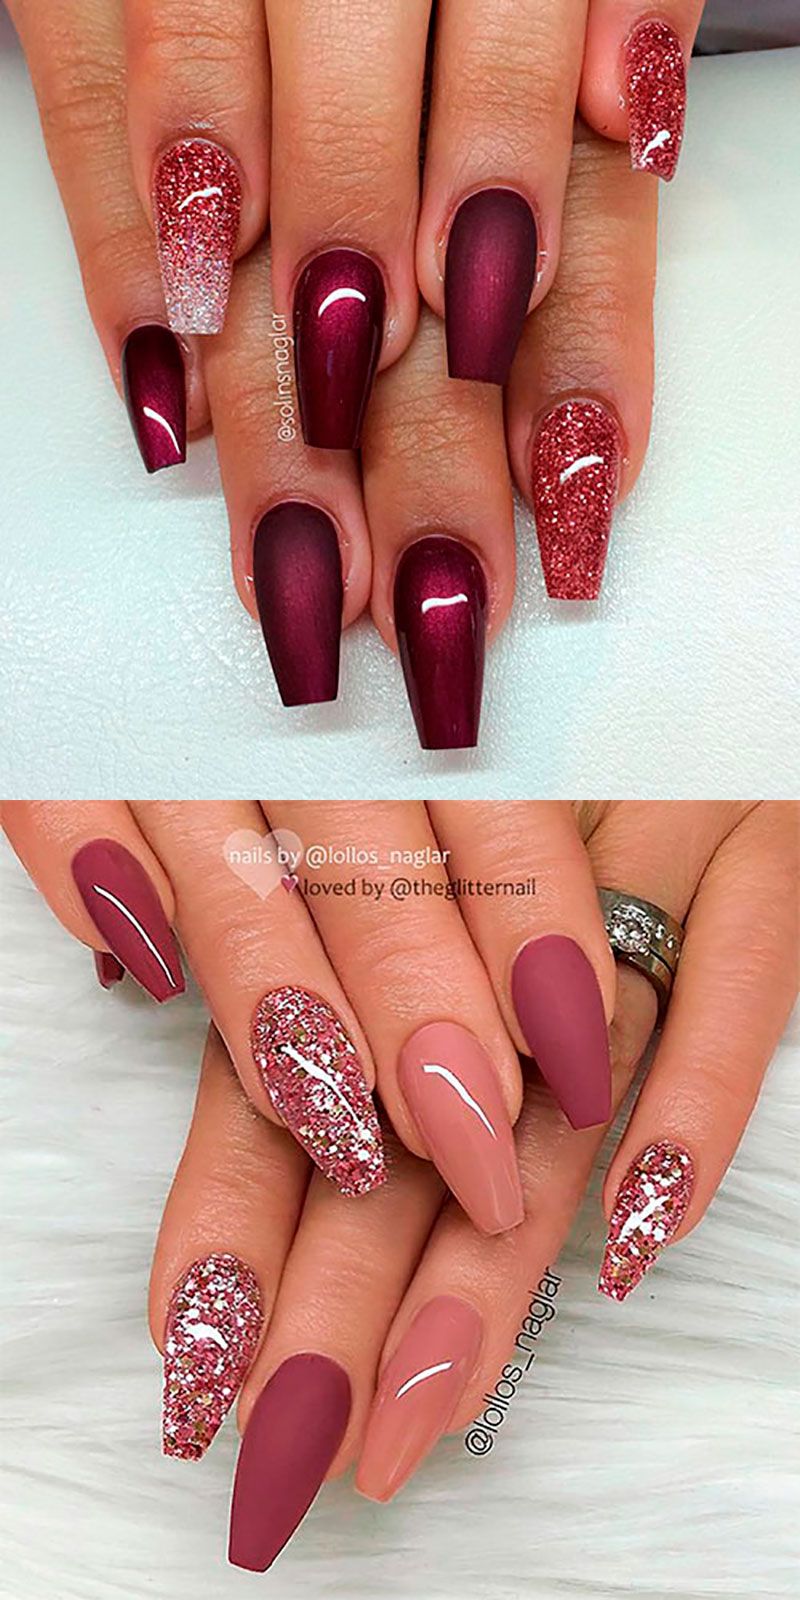 The Best Coffin Nails Ideas That Suit Everyone Fialove Nehty Gelove Nehty Dlouhe Nehty